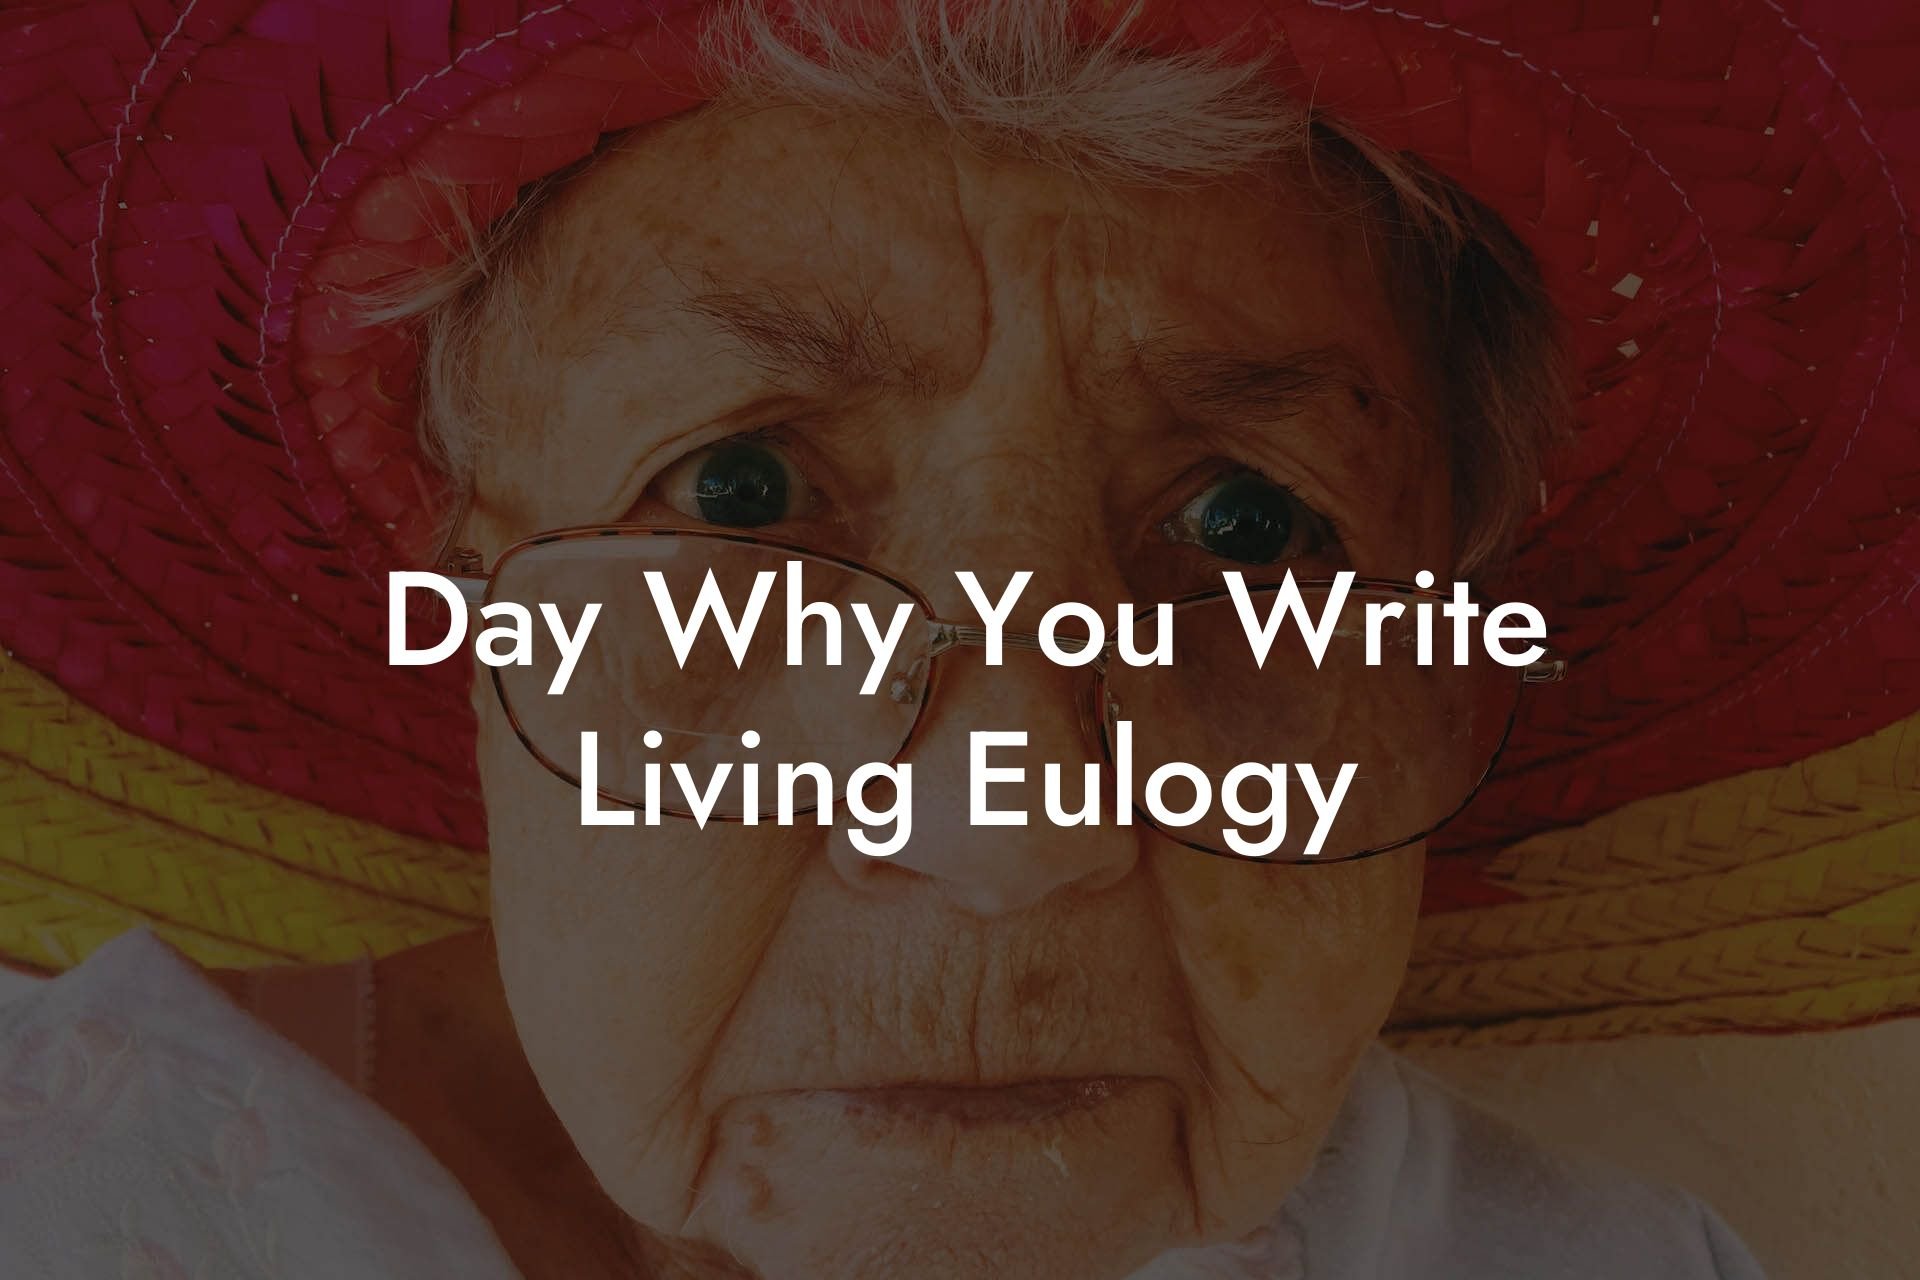 Day Why You Write Living Eulogy